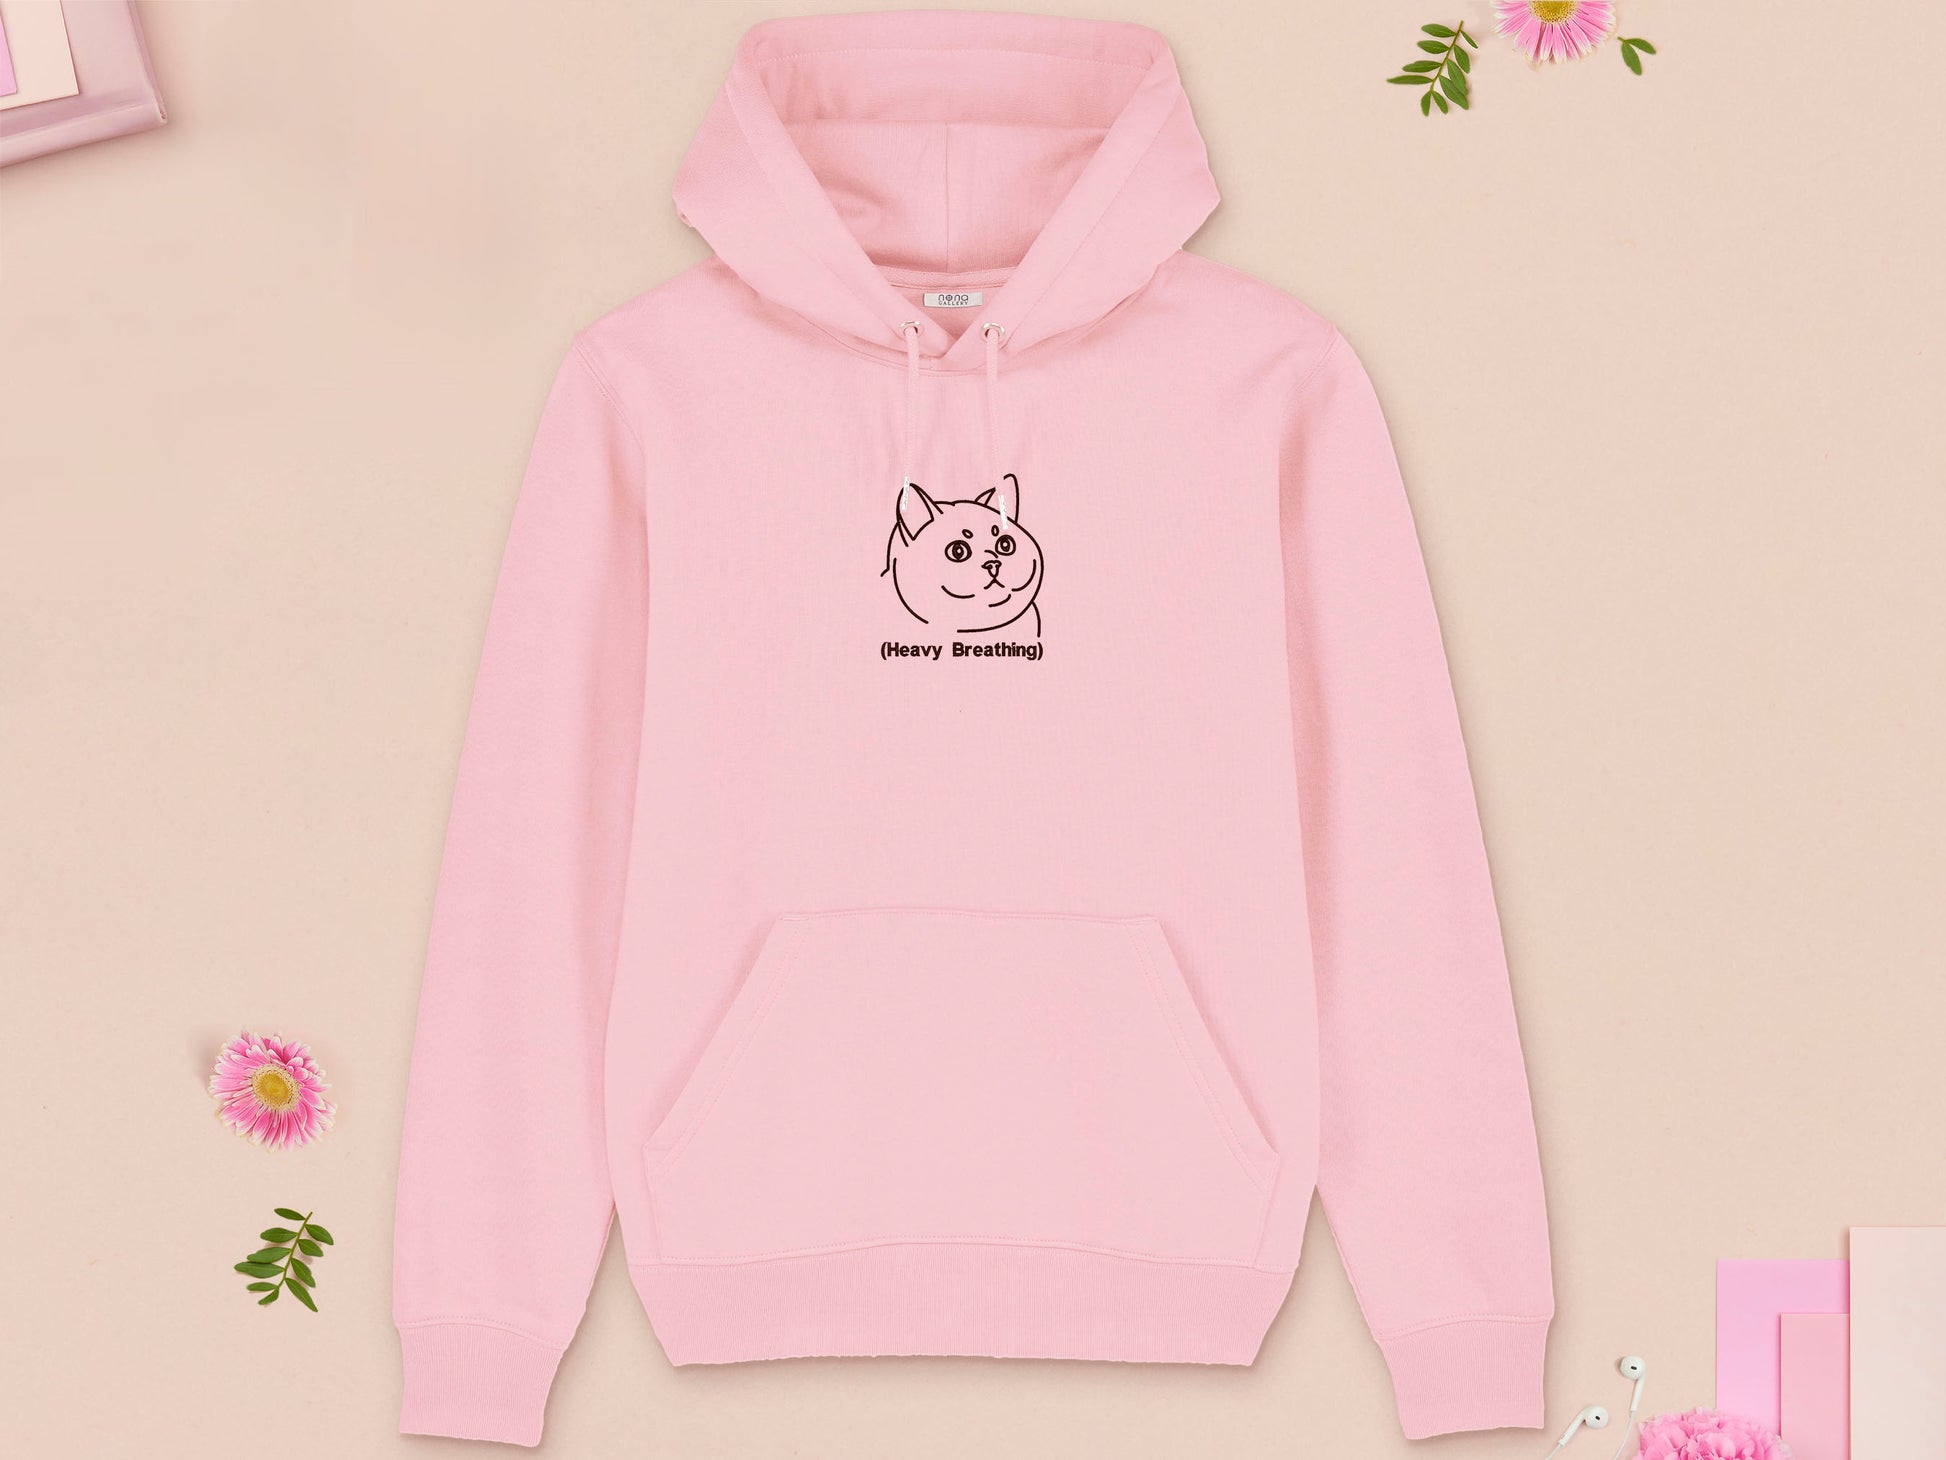 A pink long sleeve fleece hoodie, with an embroidered brown thread design of cute fat cat portrait with text underneath saying (Heavy Breathing)